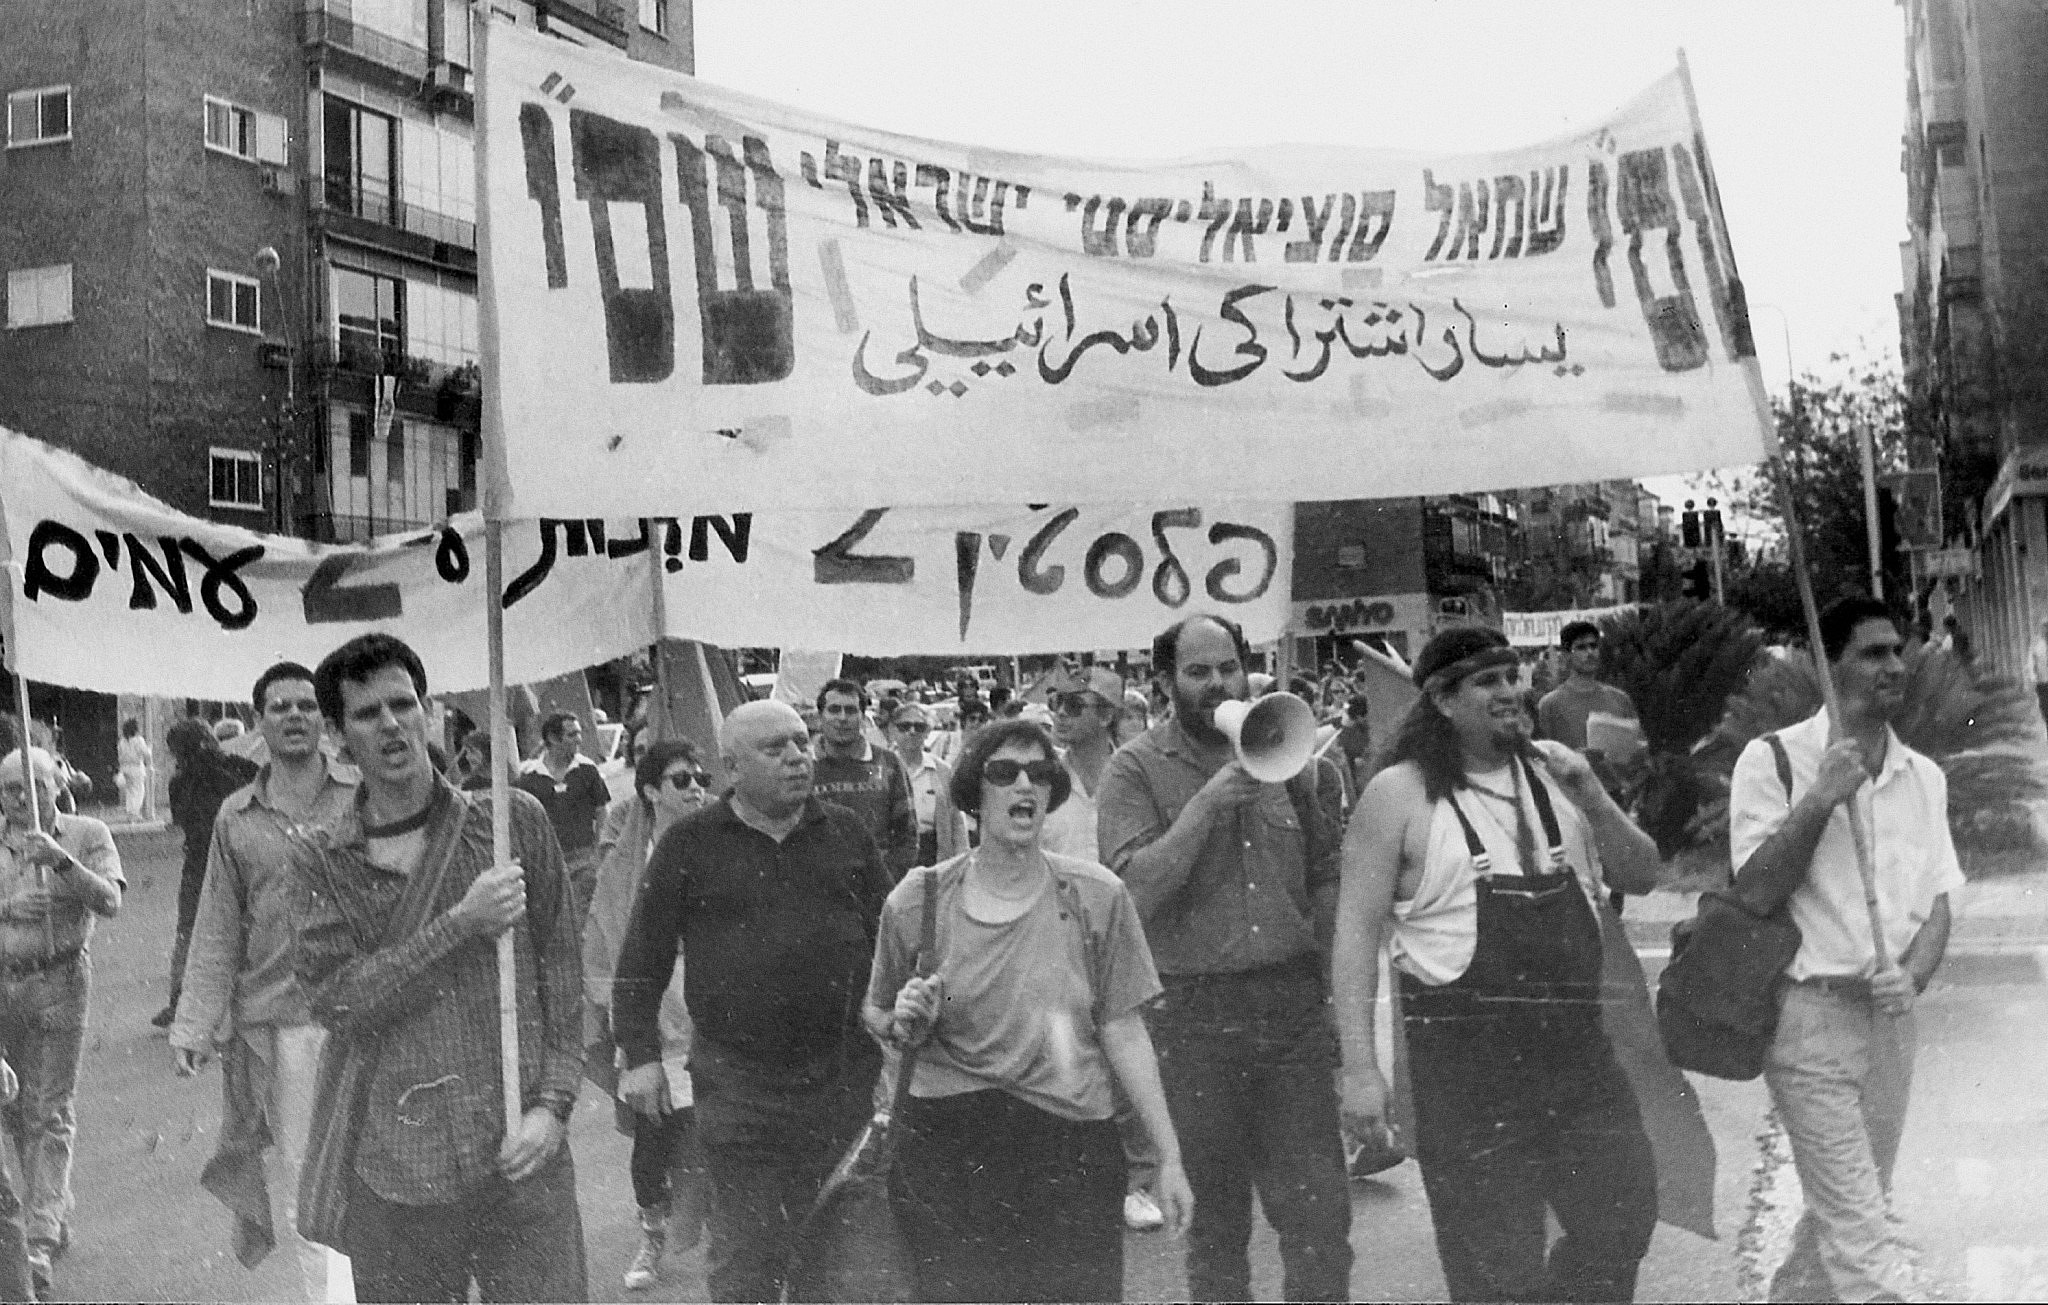 Members of the Israeli Socialist Left (SHASI) march in Tel Aviv on May Day, May 1, 1990. (Courtesy of the Kaminer family)